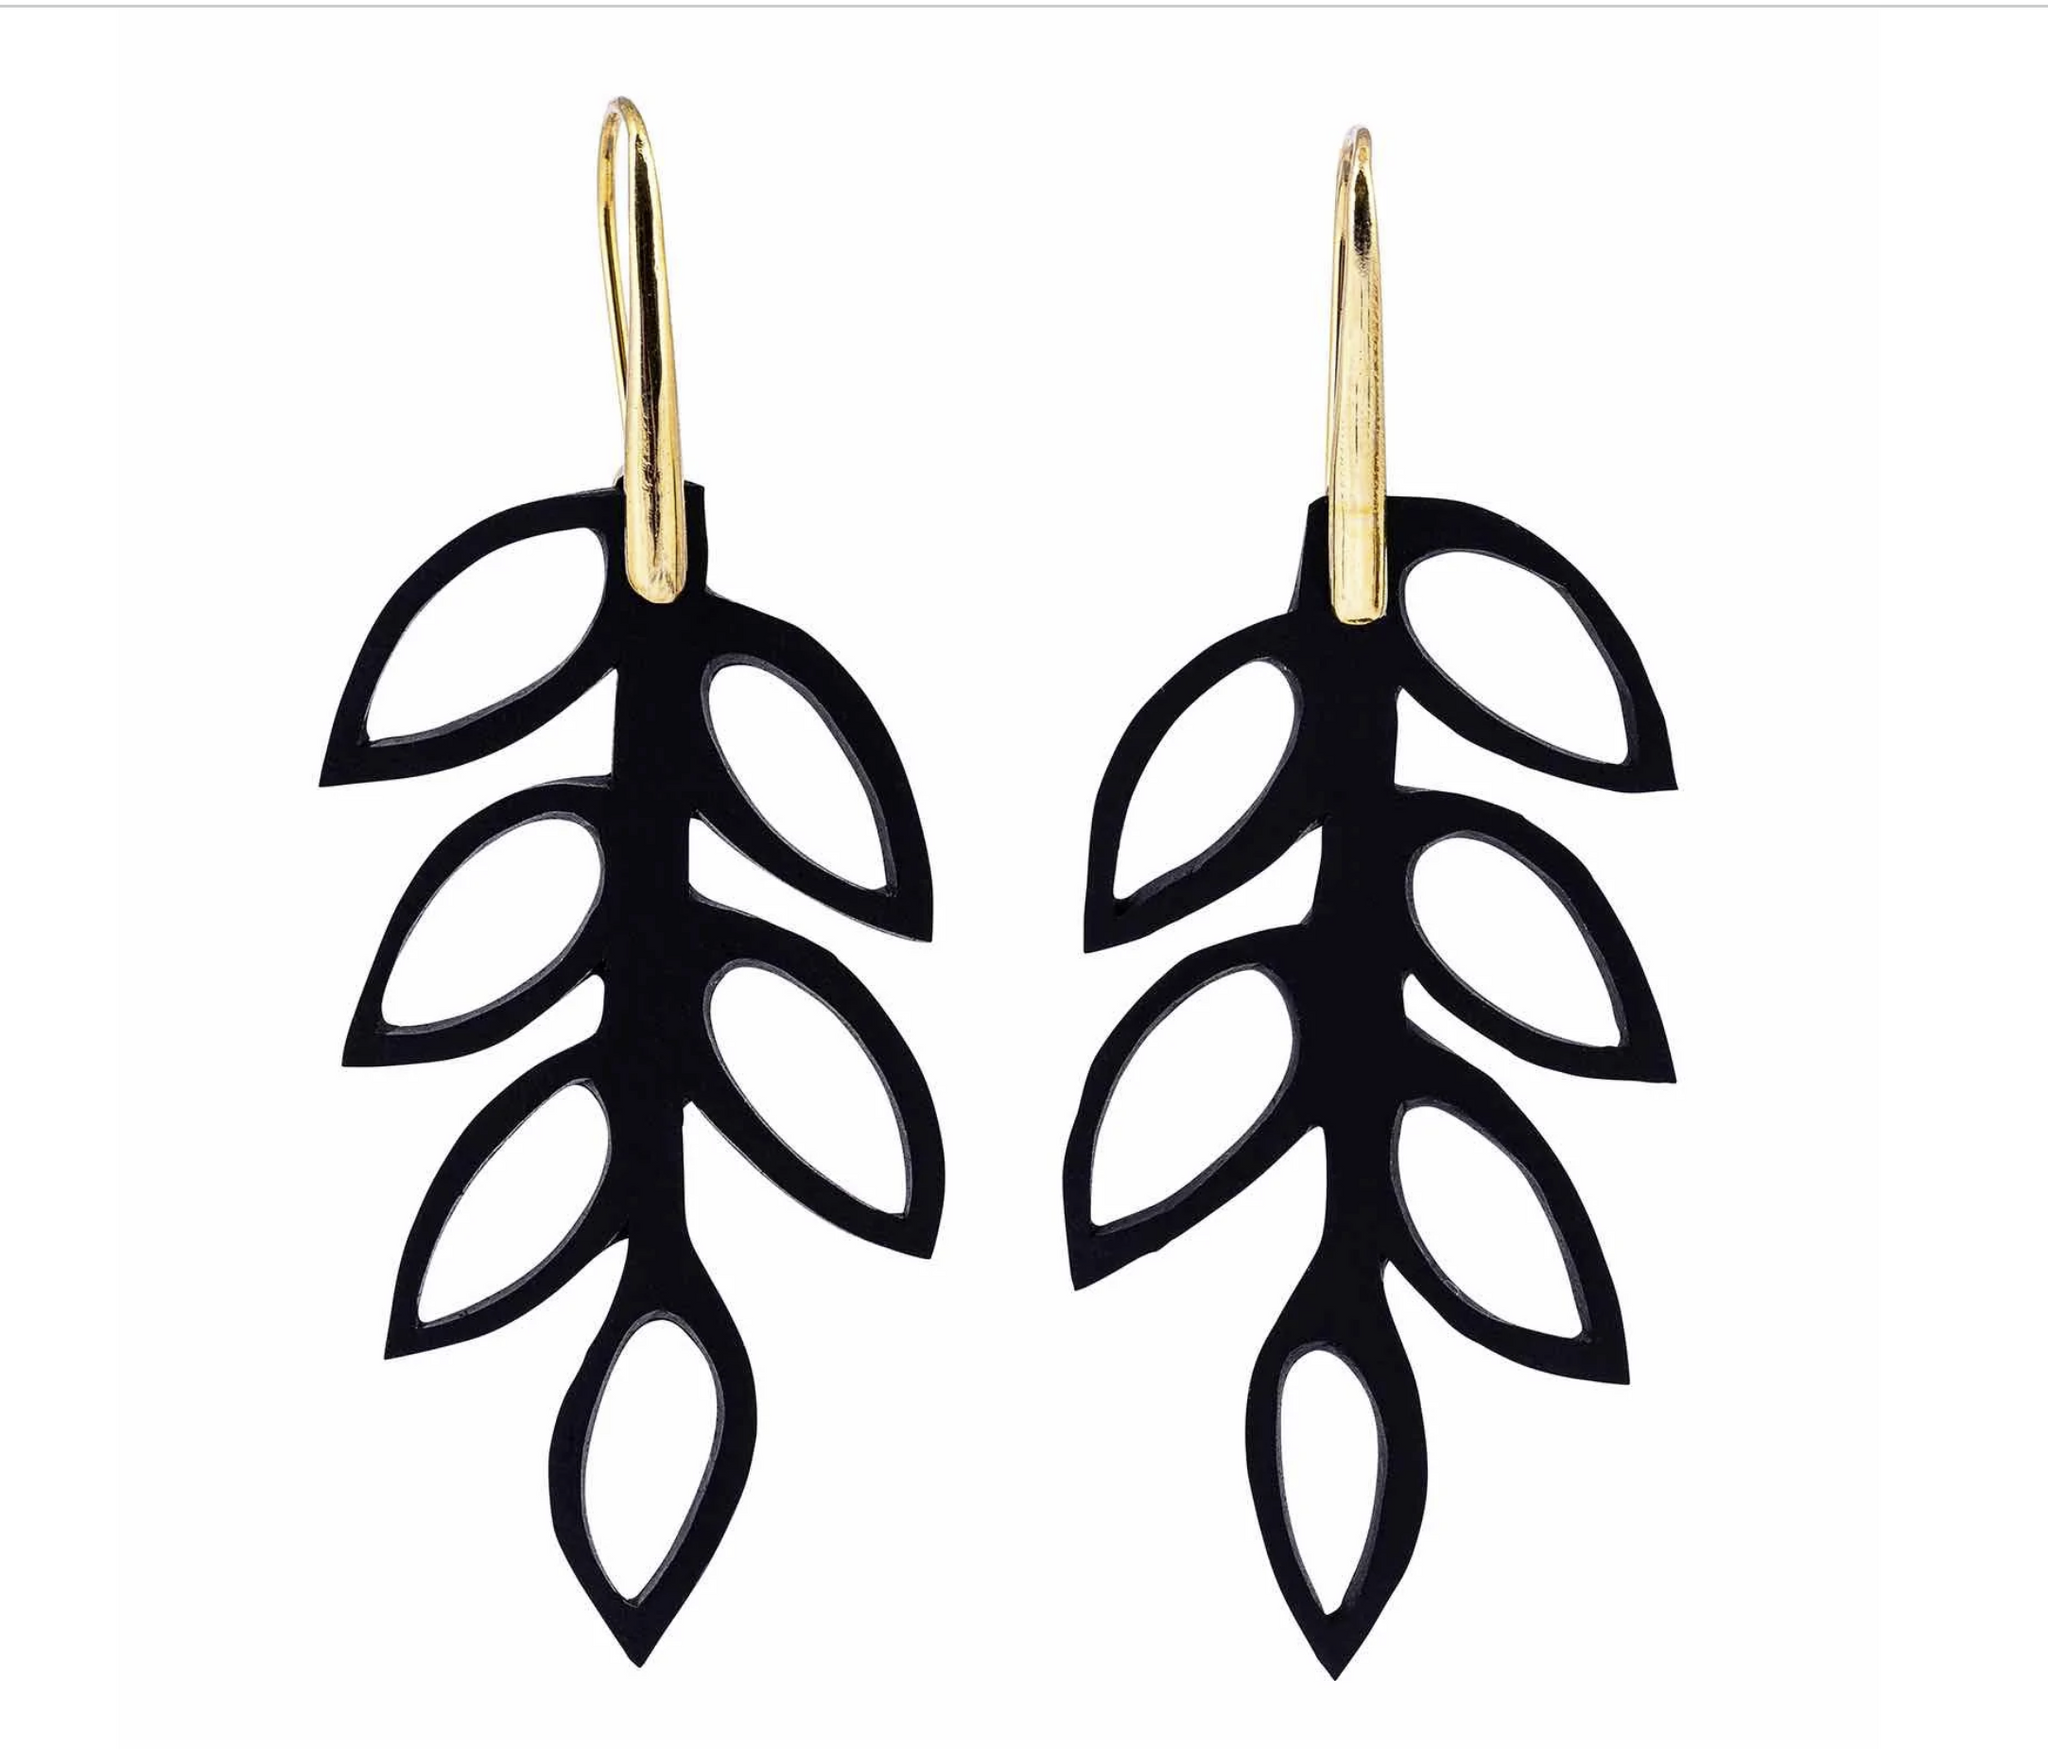 Evergreen Leaf Recycled Rubber Earrings by Paguro